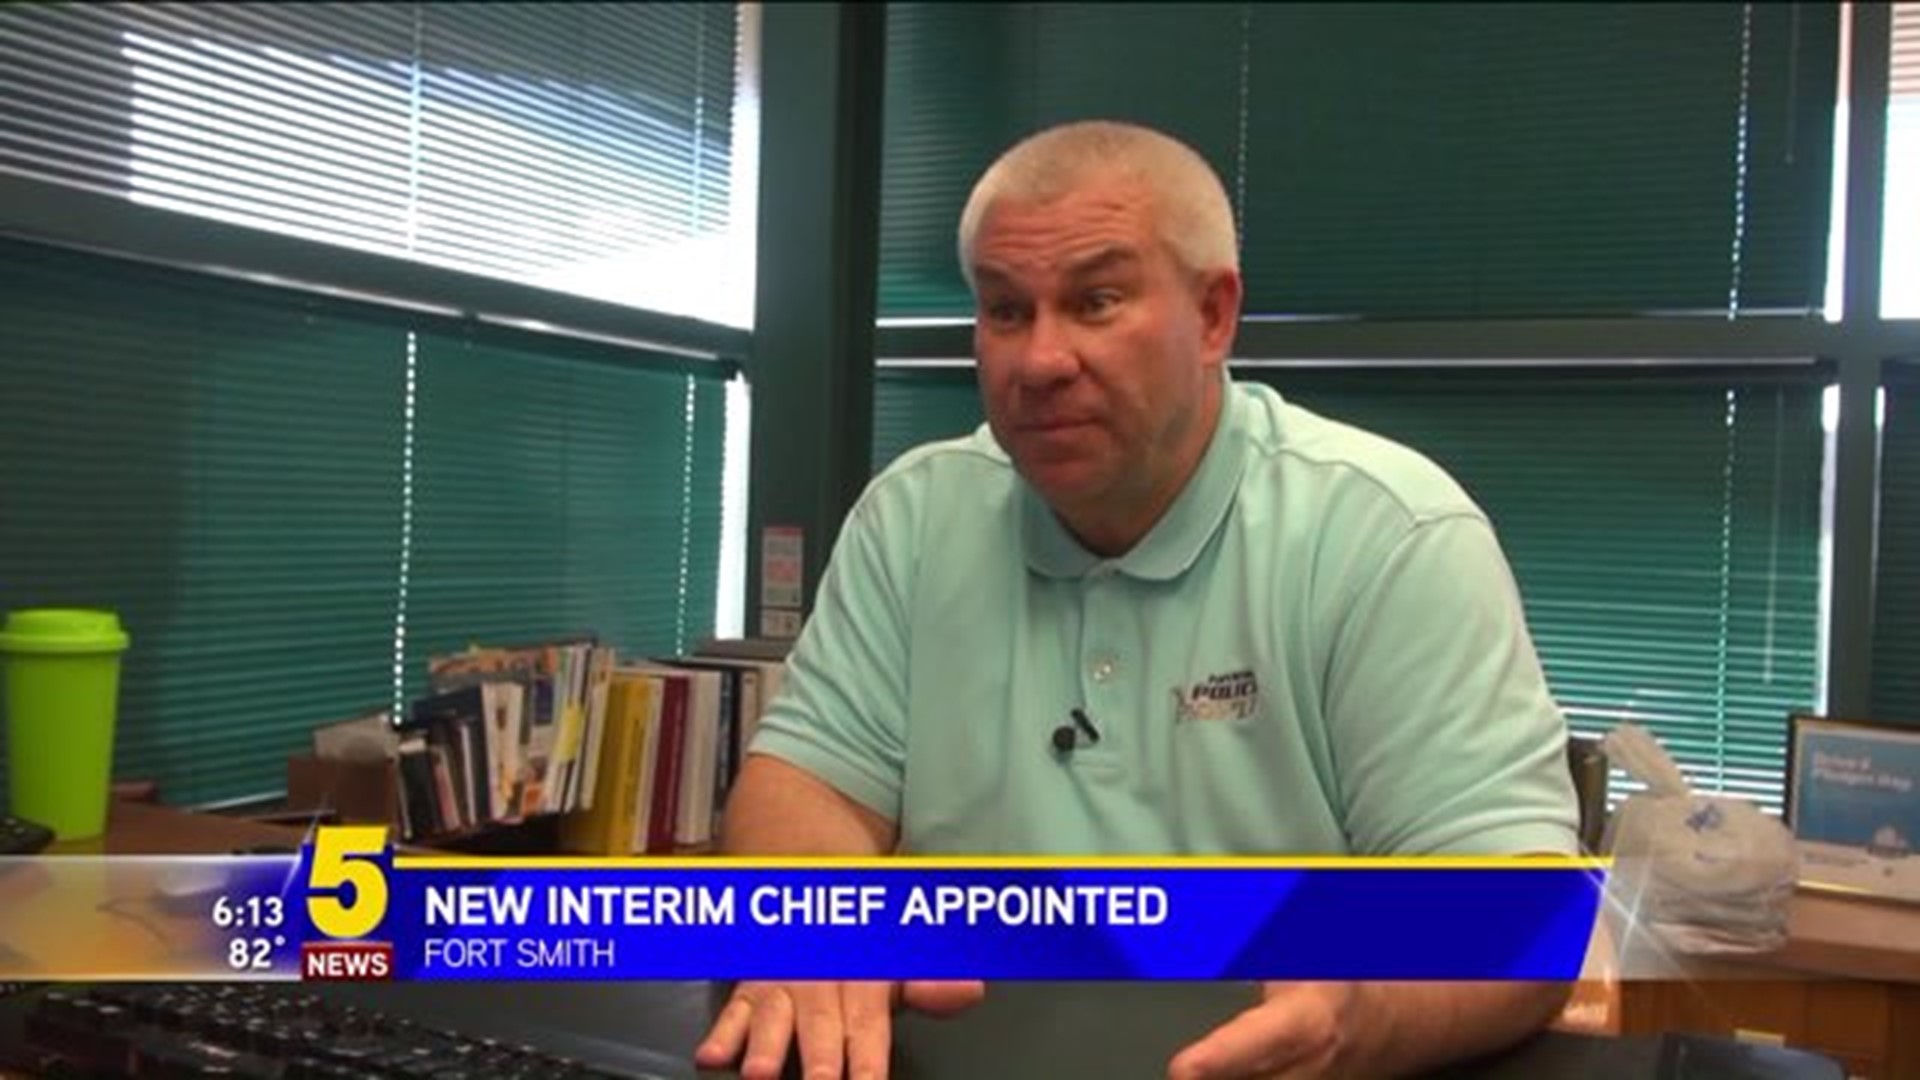 New Interim Chief Appointed